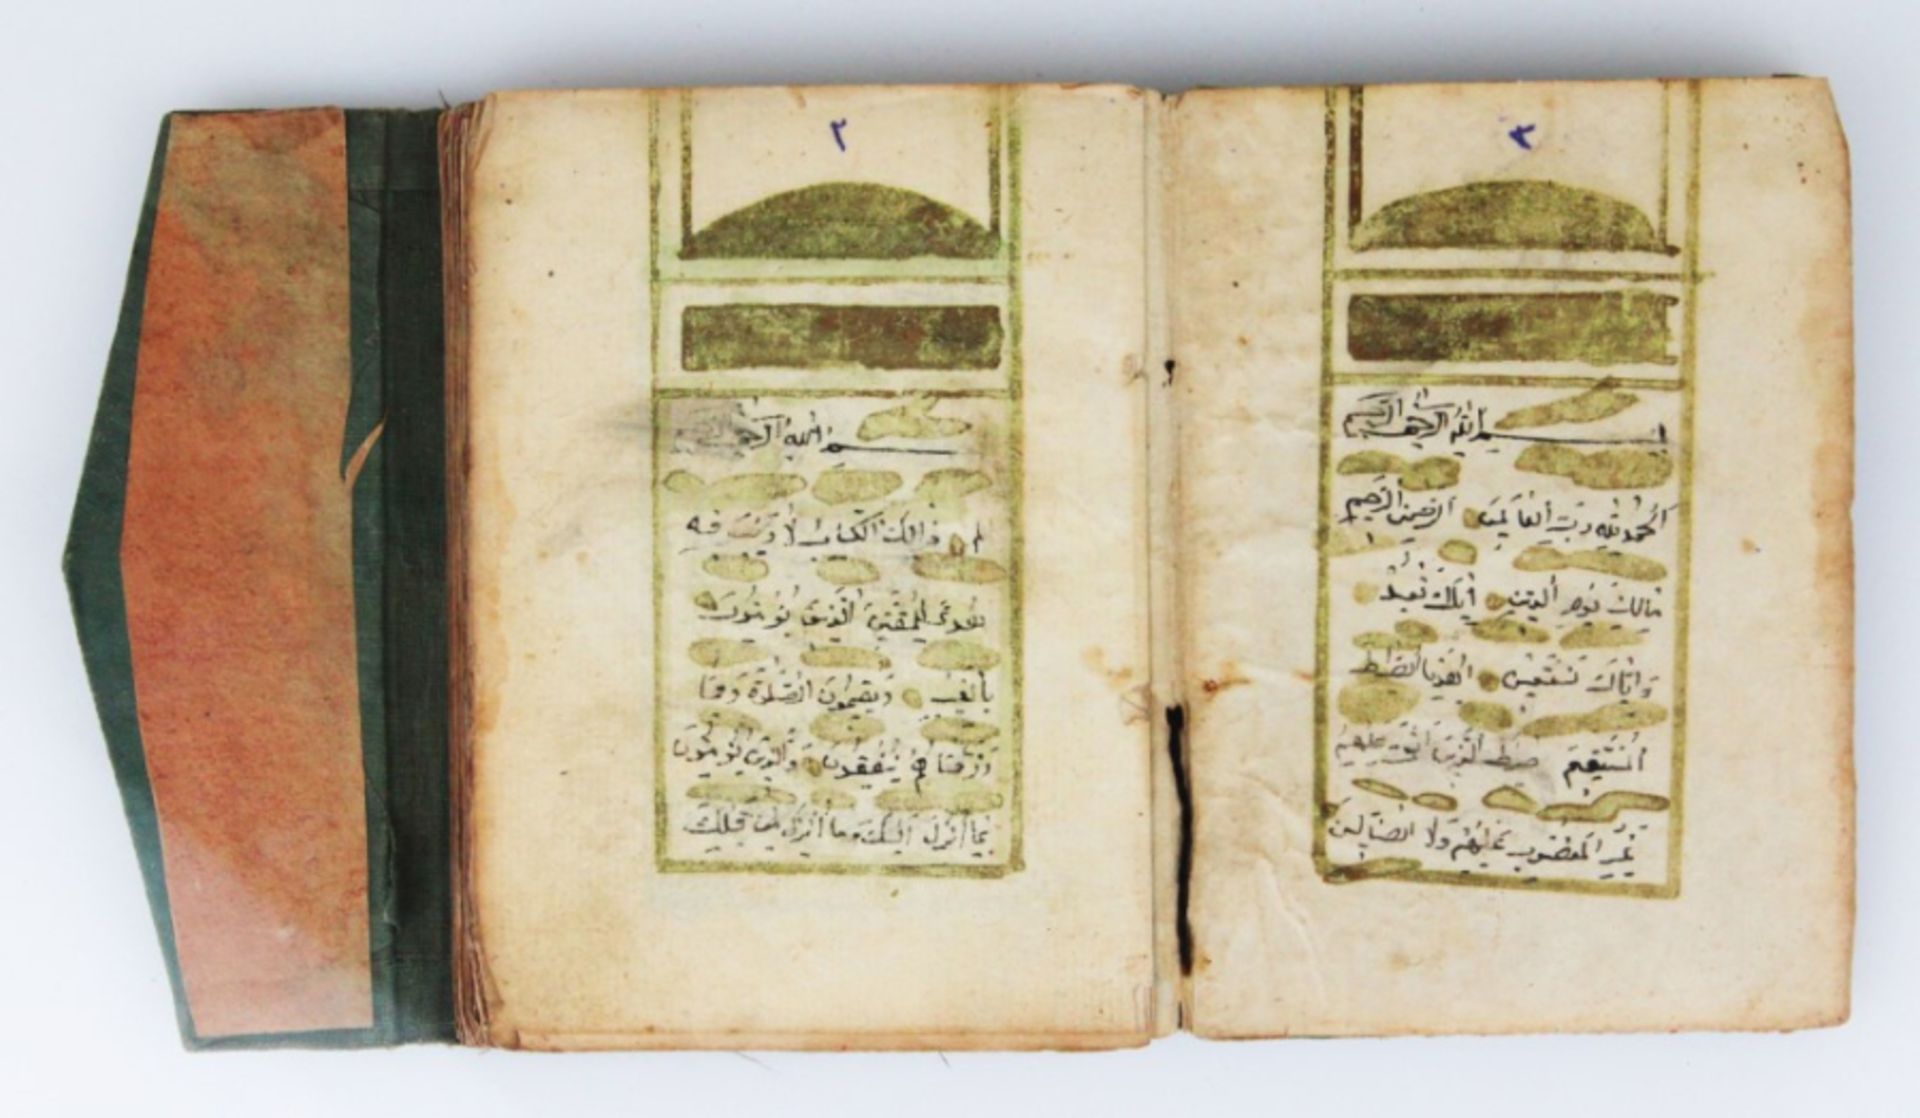 A 18th century Ottoman book with suras and prayers - Image 9 of 12